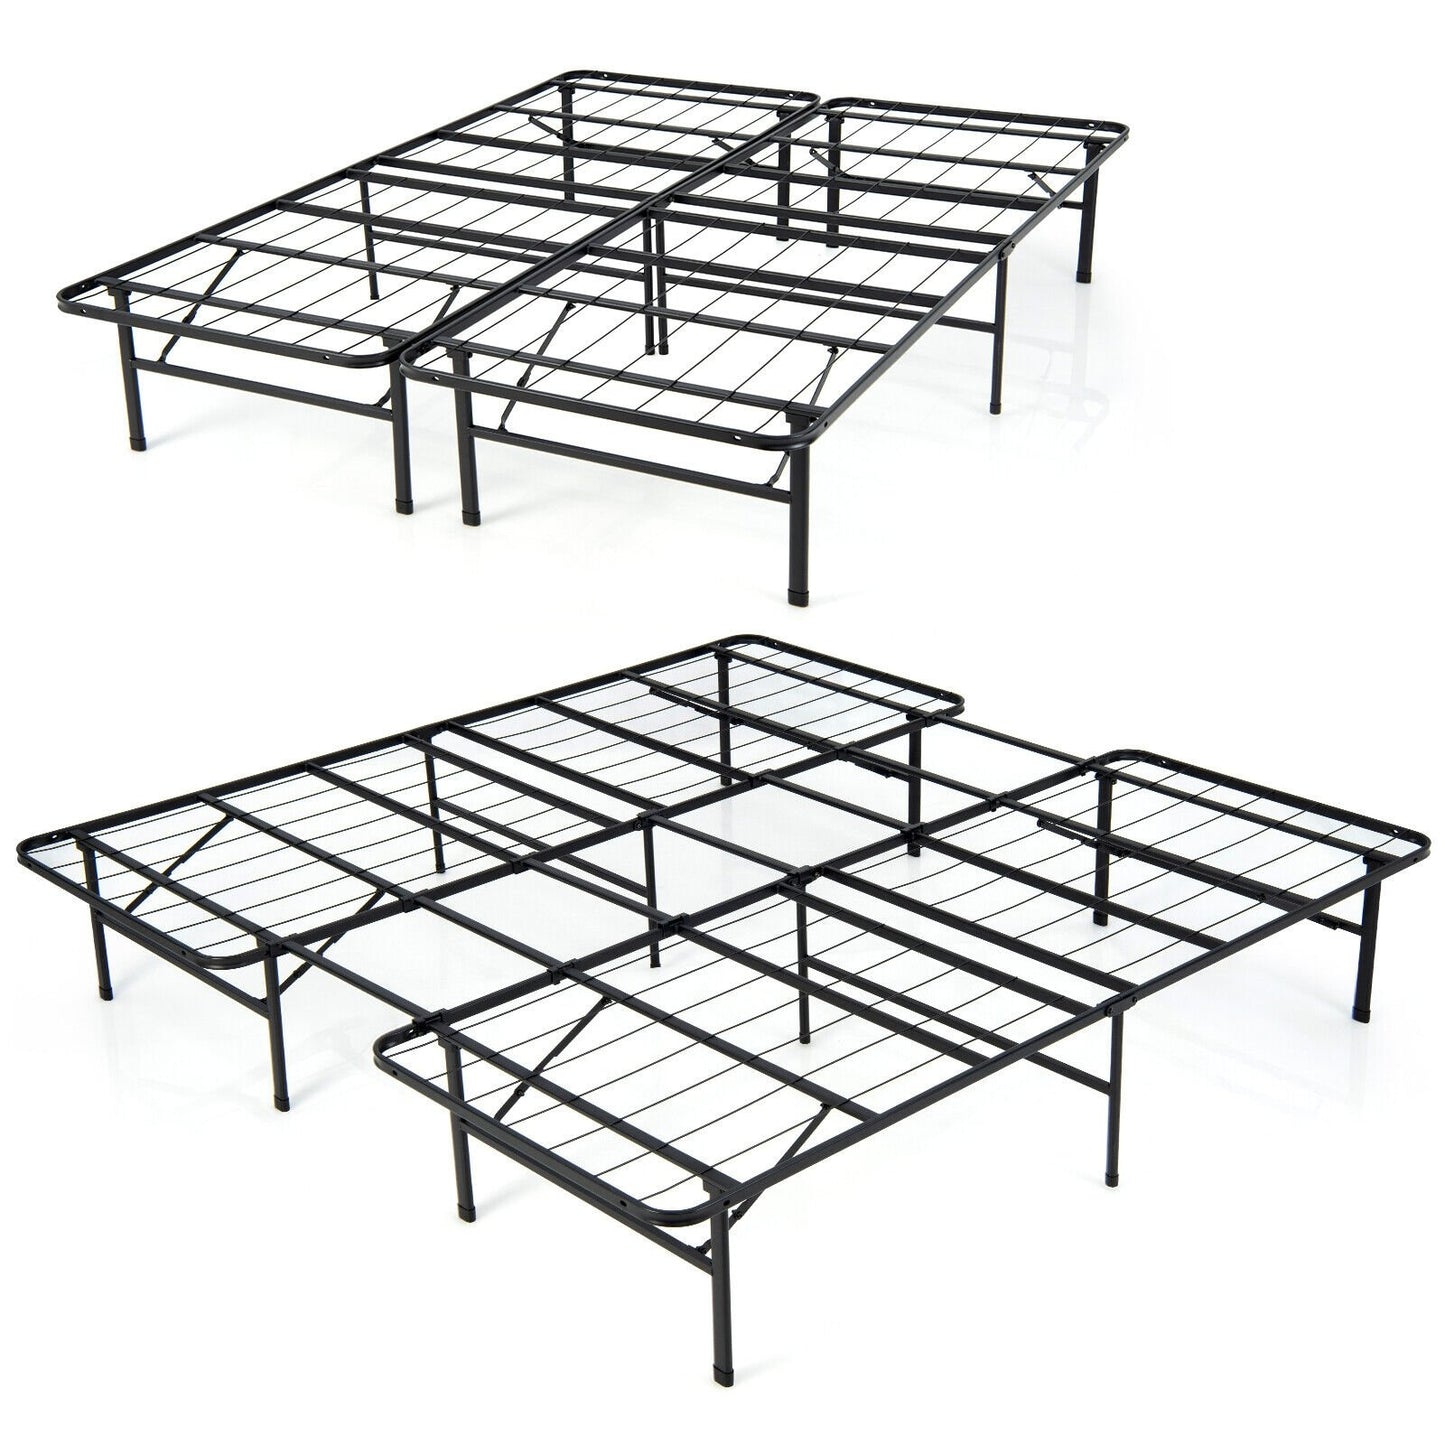 Queen/King Size Folding Steel Platform Bed Frame for Kids and Adults-King Size, Black